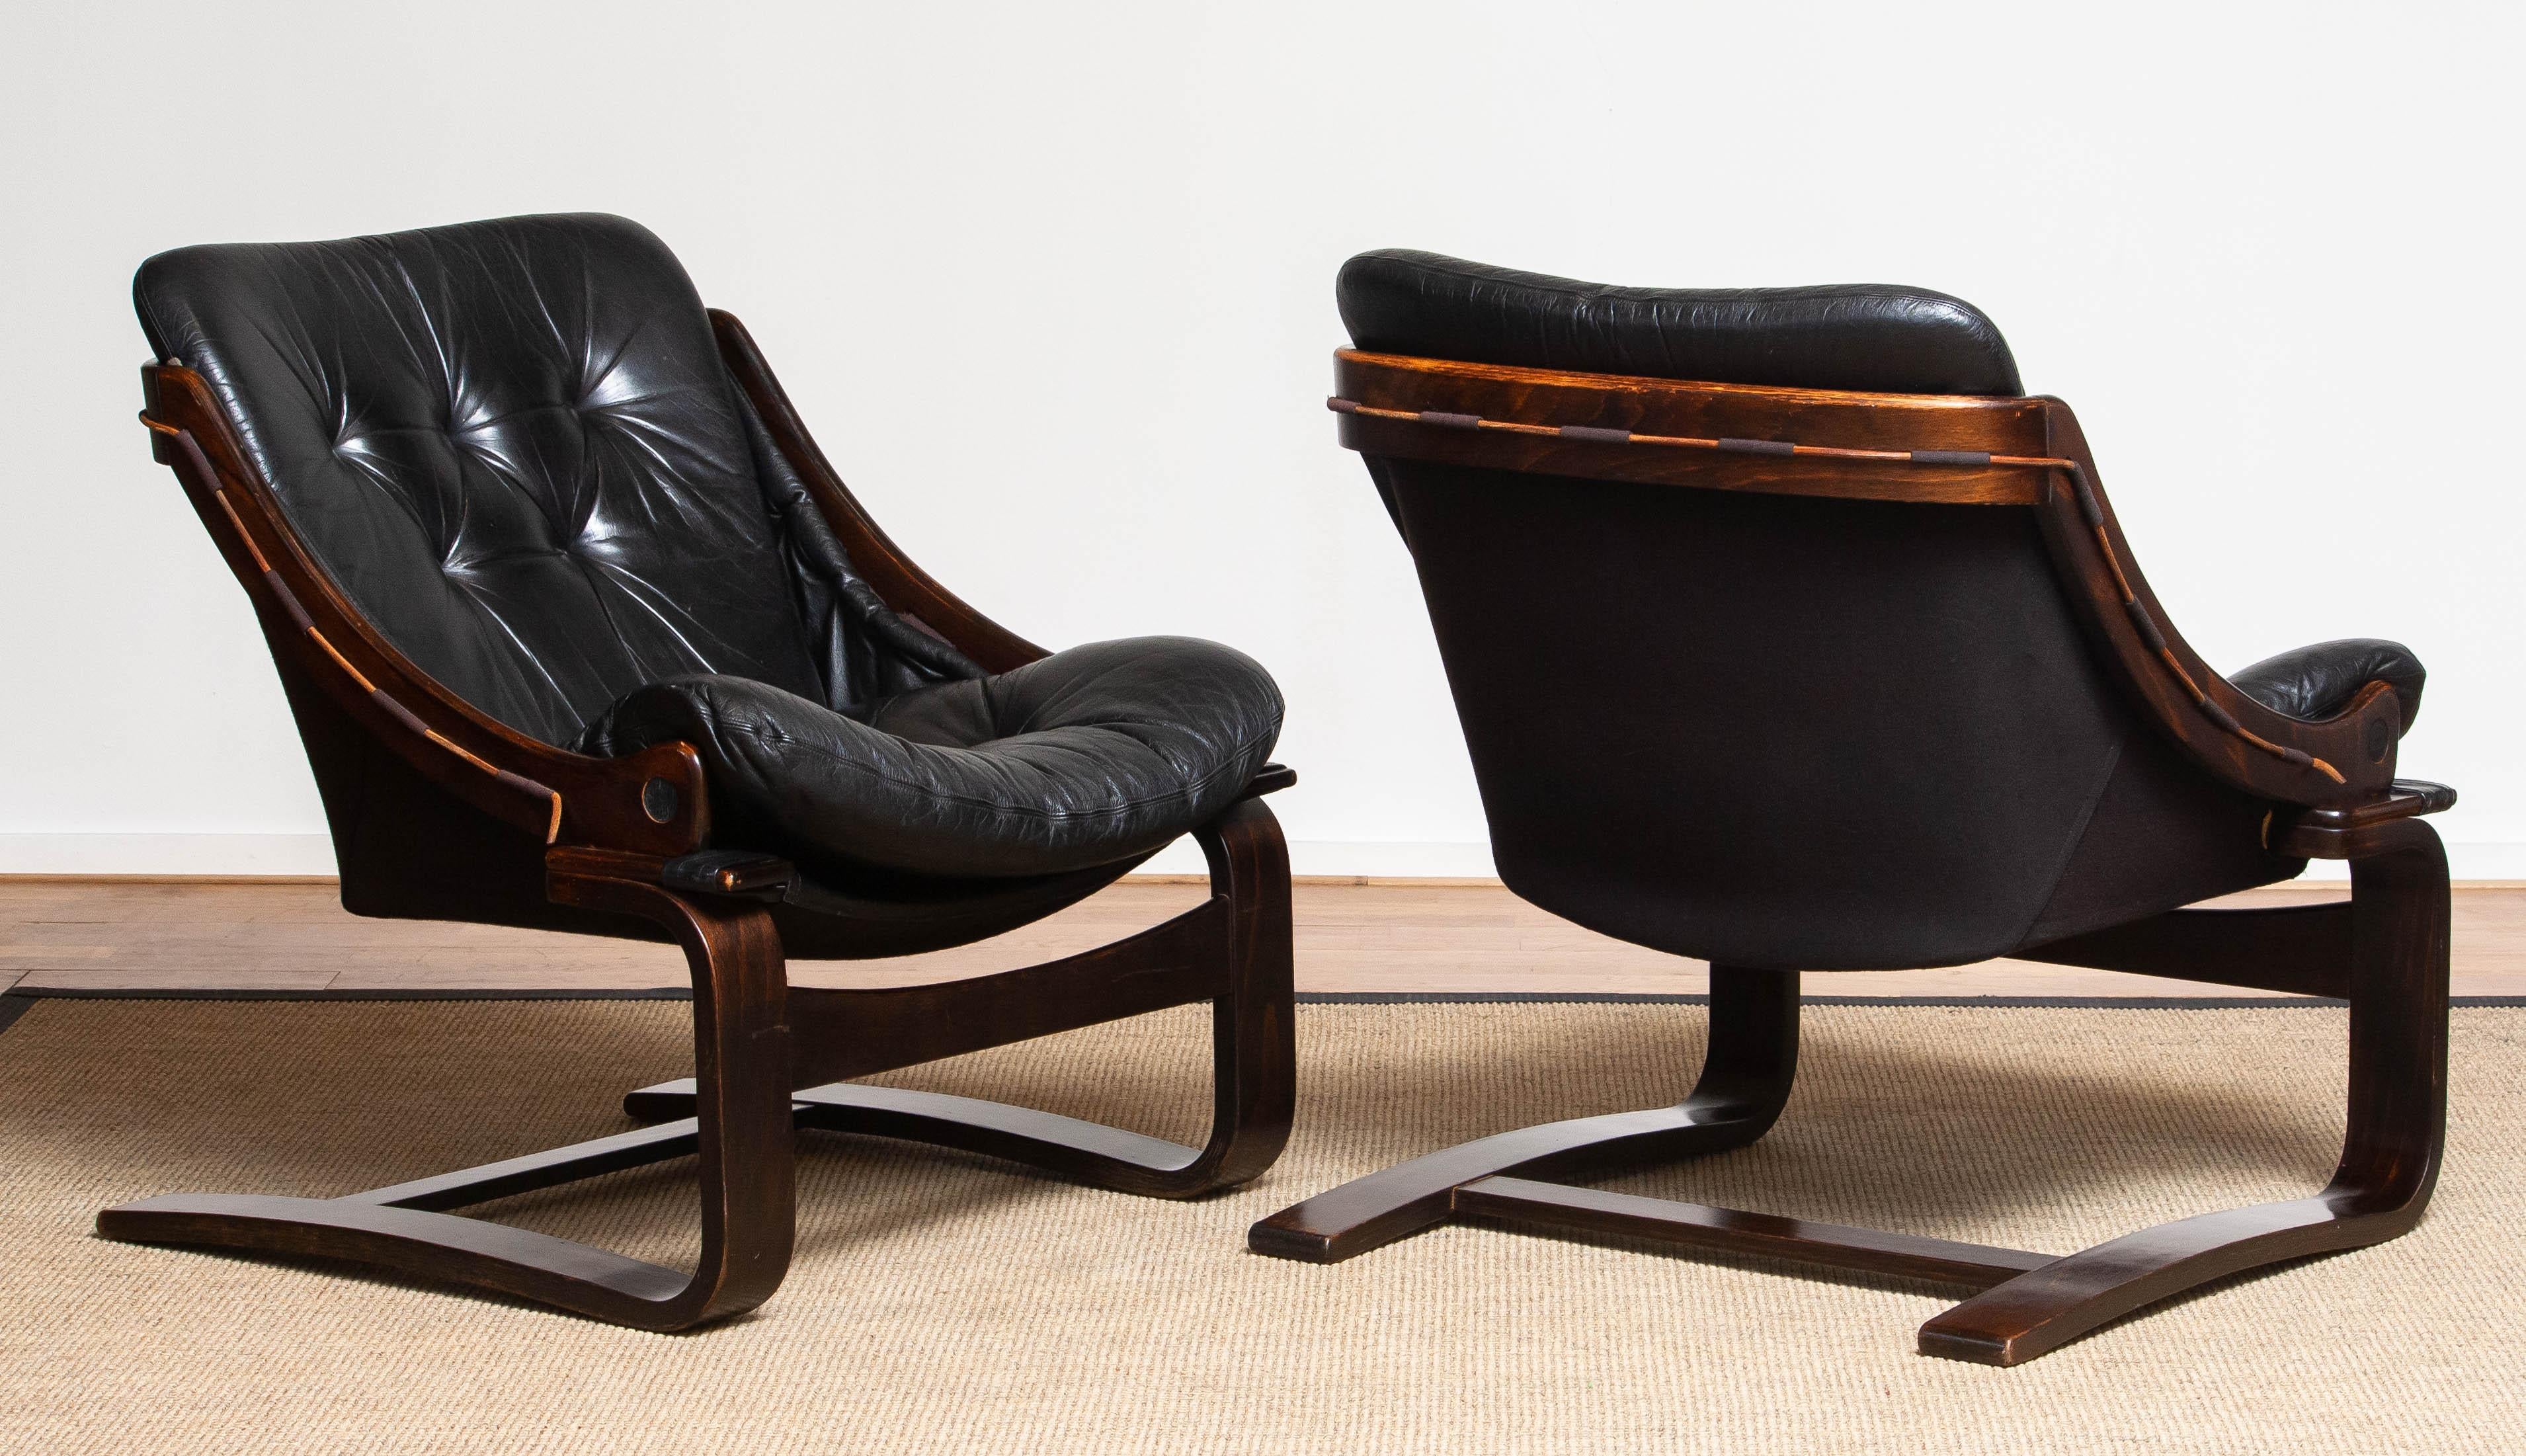 1970's Pair Black Leather Club / Lounge Chairs by Ake Fribytter for Nelo Sweden 1